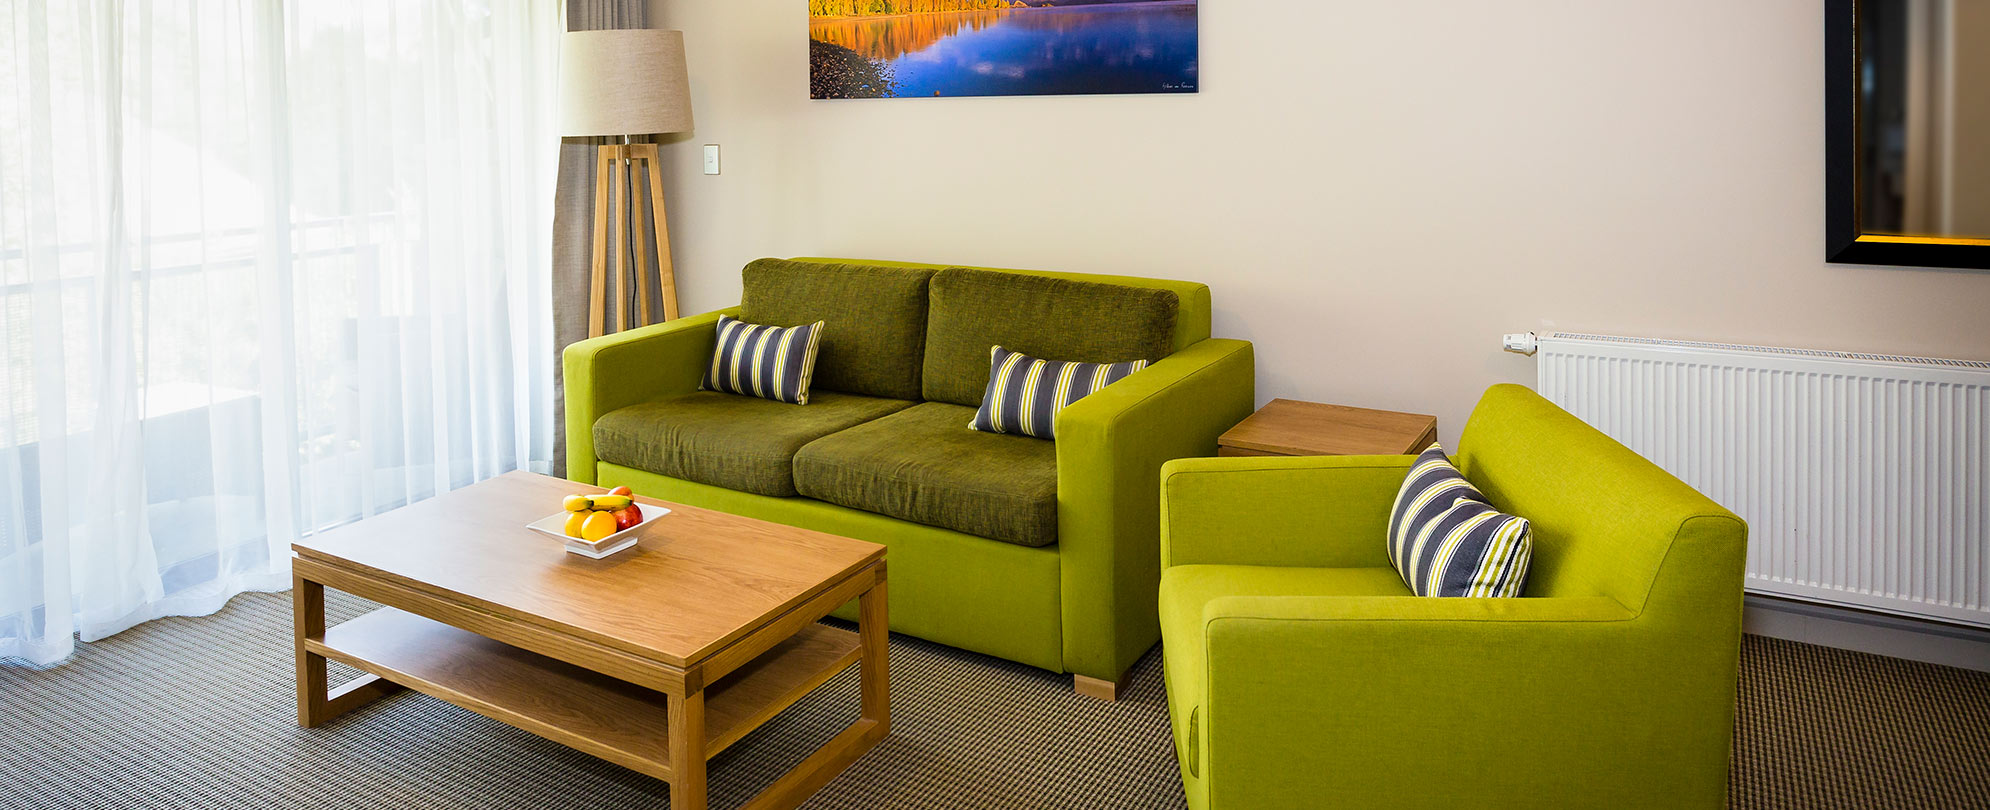 The living area of a 2-bedroom suite at Club Wyndham Wanaka.